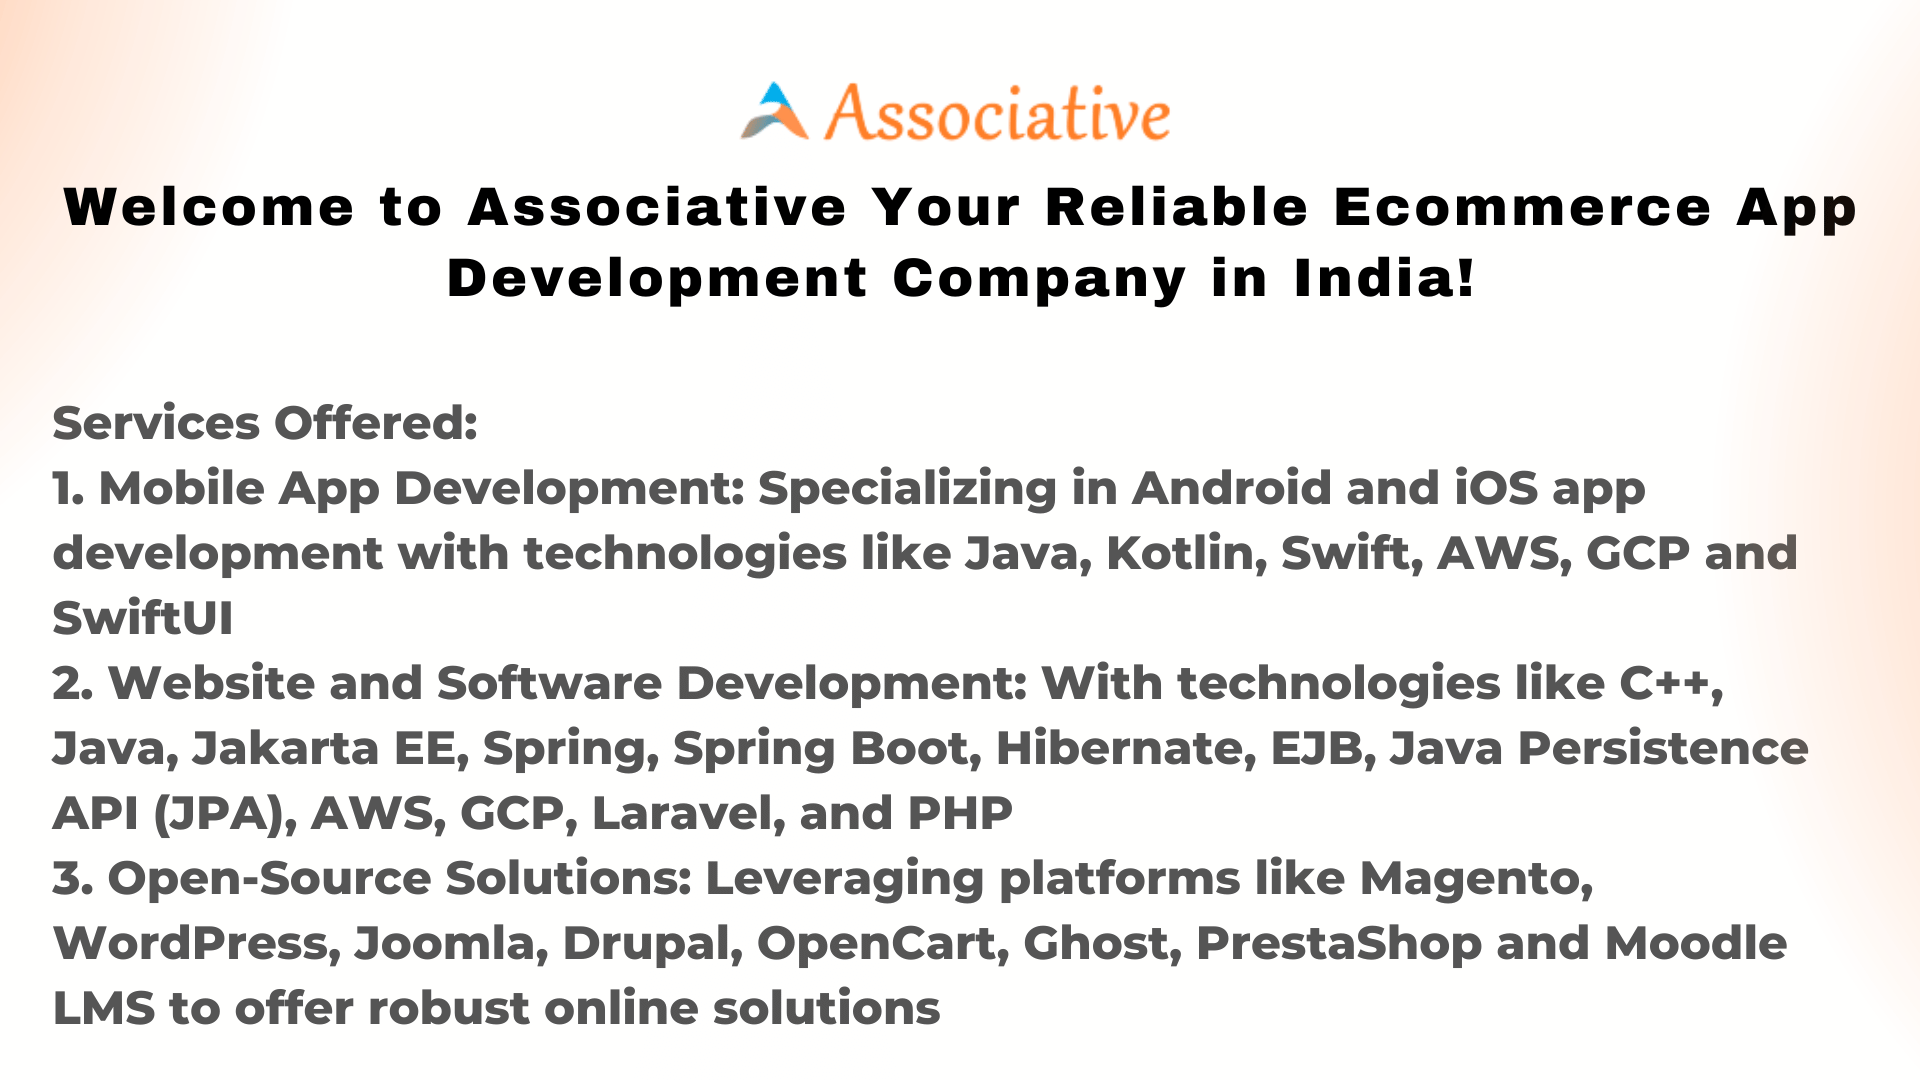 Welcome to Associative Your Reliable Ecommerce App Development Company in India